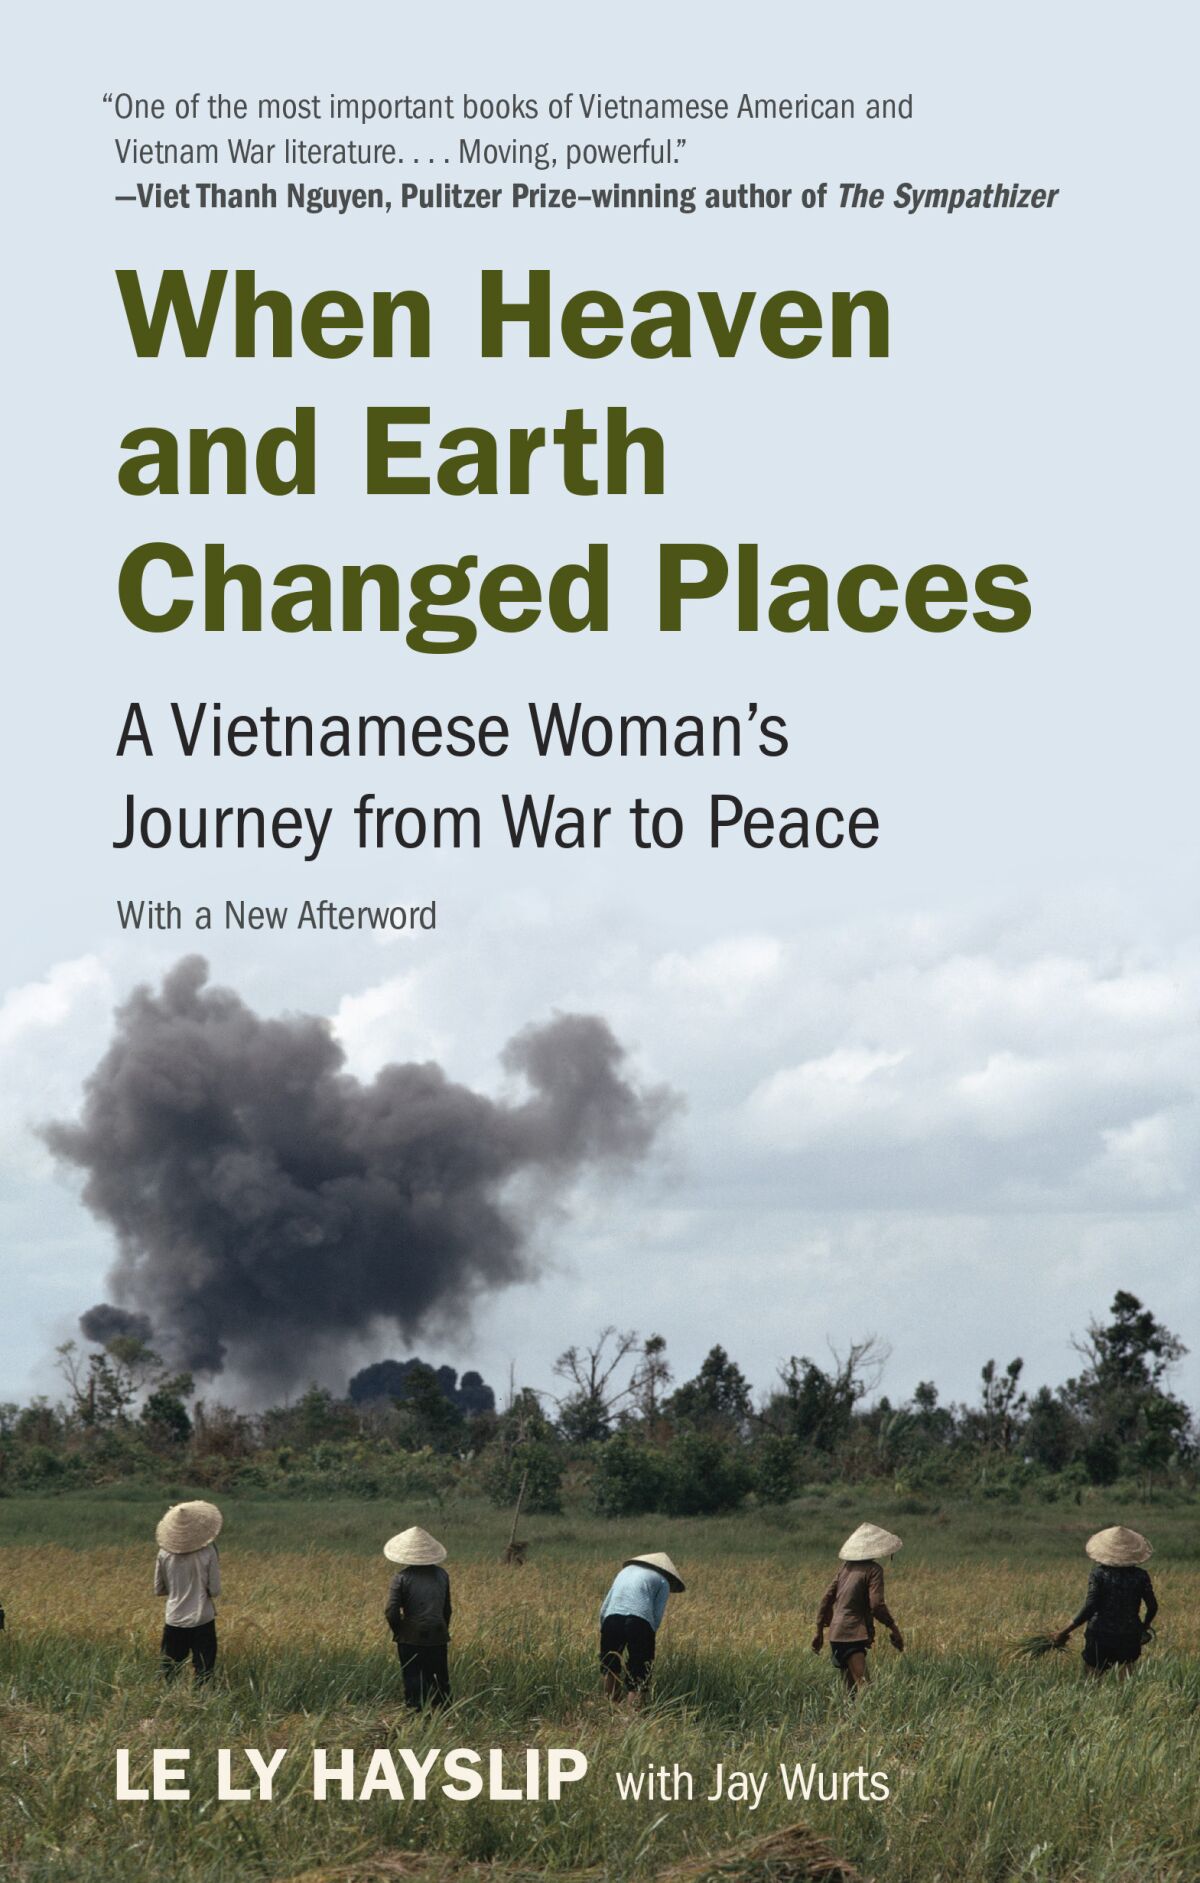 Book jacket for "When Heaven and Earth Changed Places" by Le Ly Hayslip with Jay Wurts